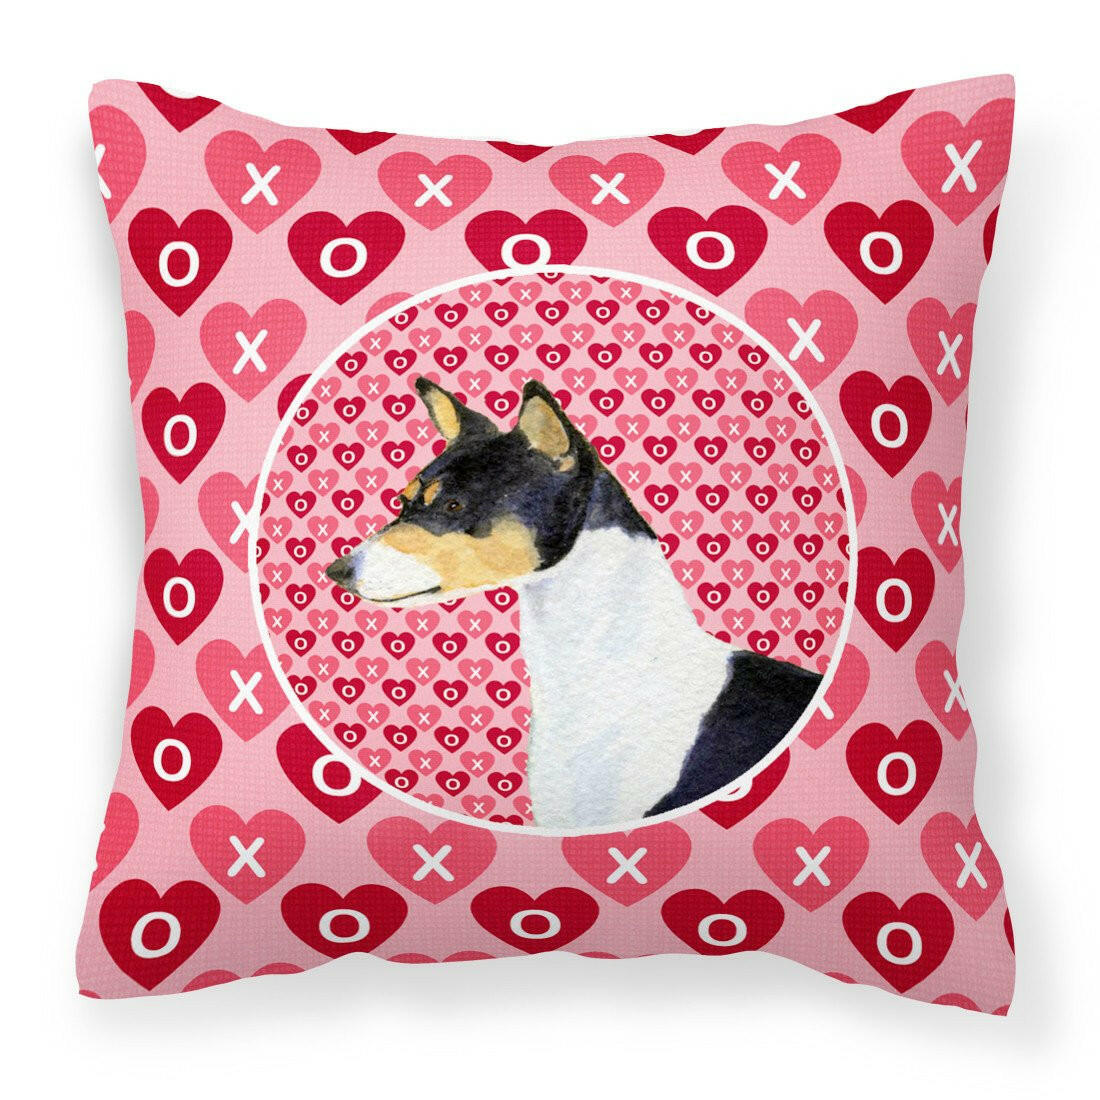 Basenji Hearts Love and Valentine's Day Portrait Fabric Decorative Pillow SS4514PW1414 by Caroline's Treasures